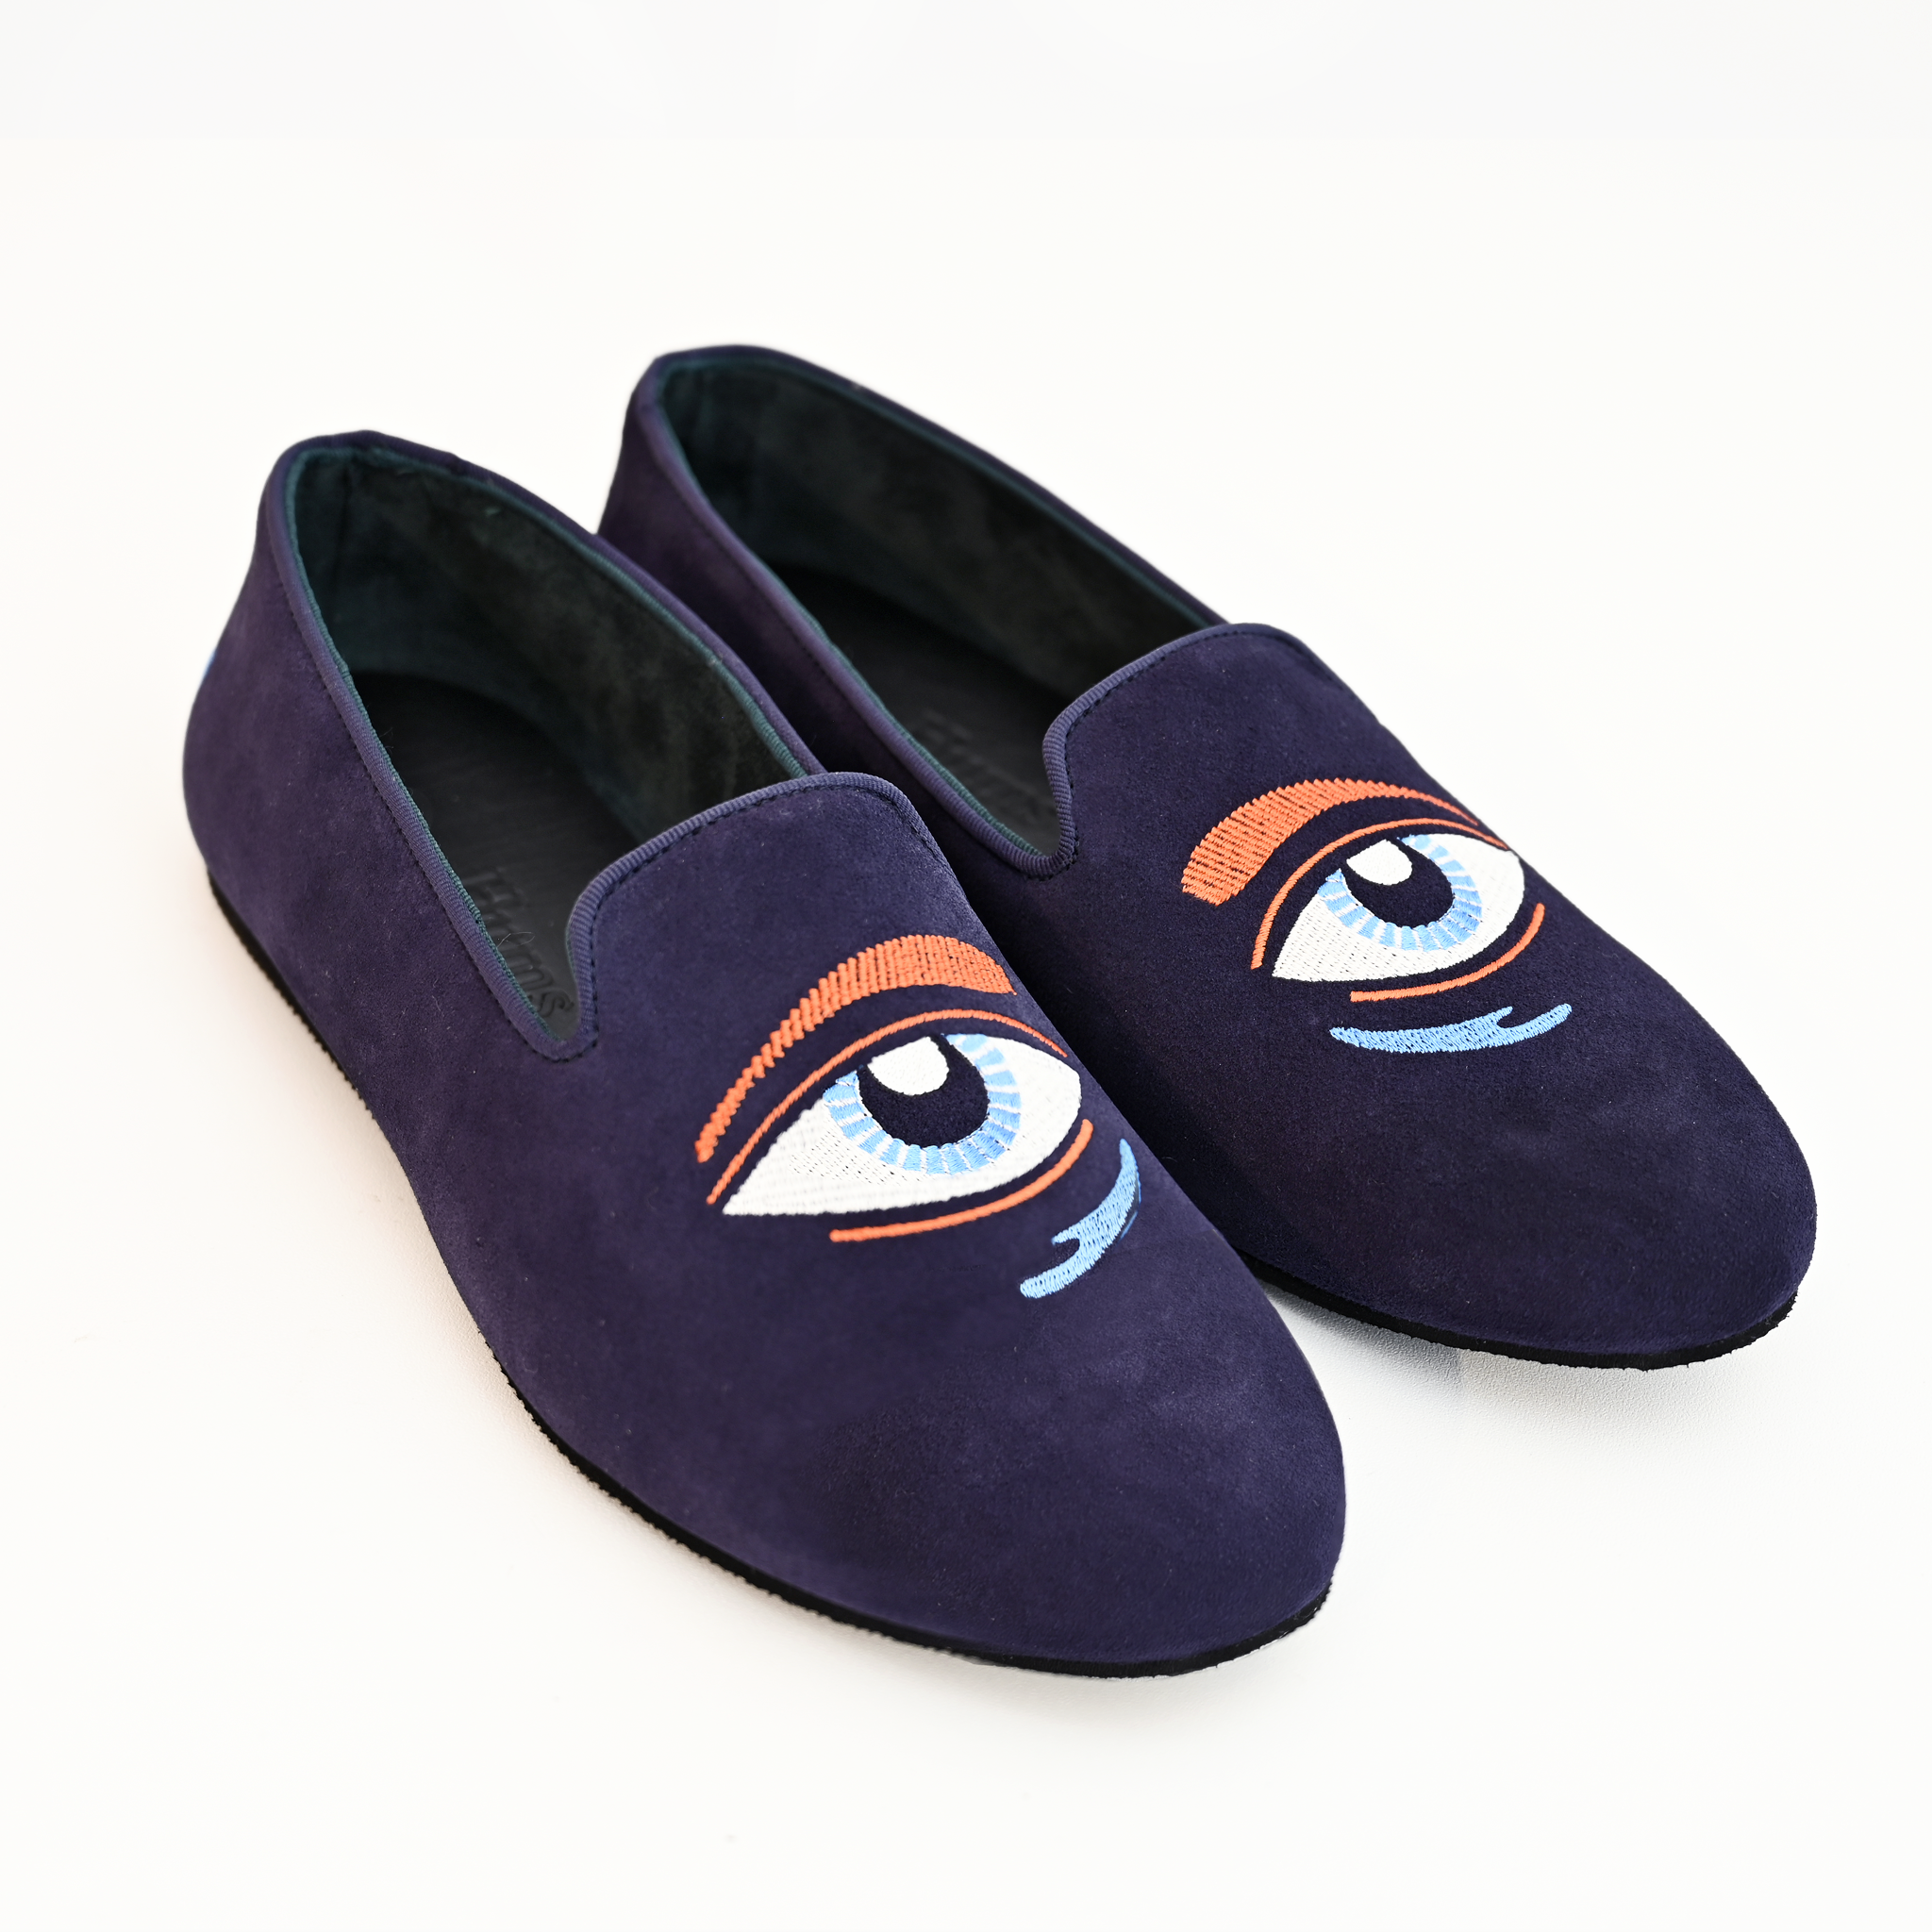 Hums Eye Loafers